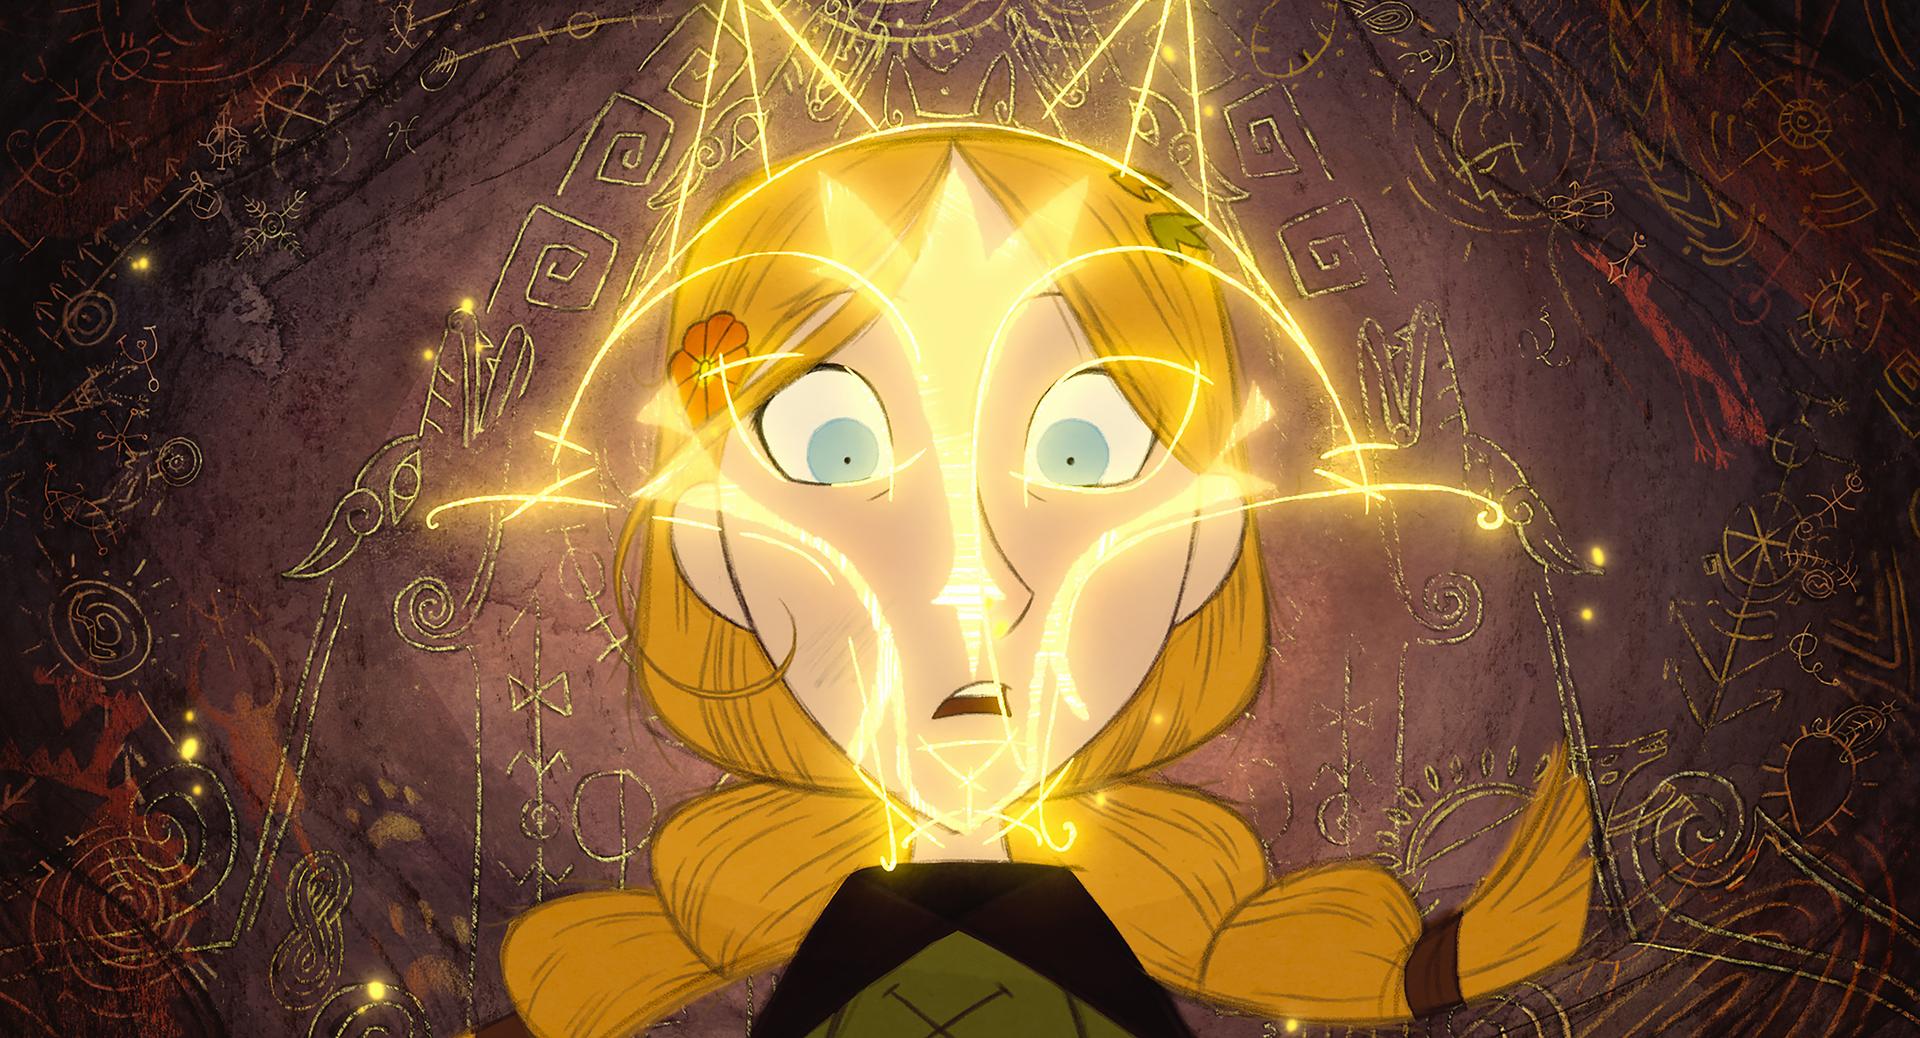 Animation of a surprised girl with magical lights around her face